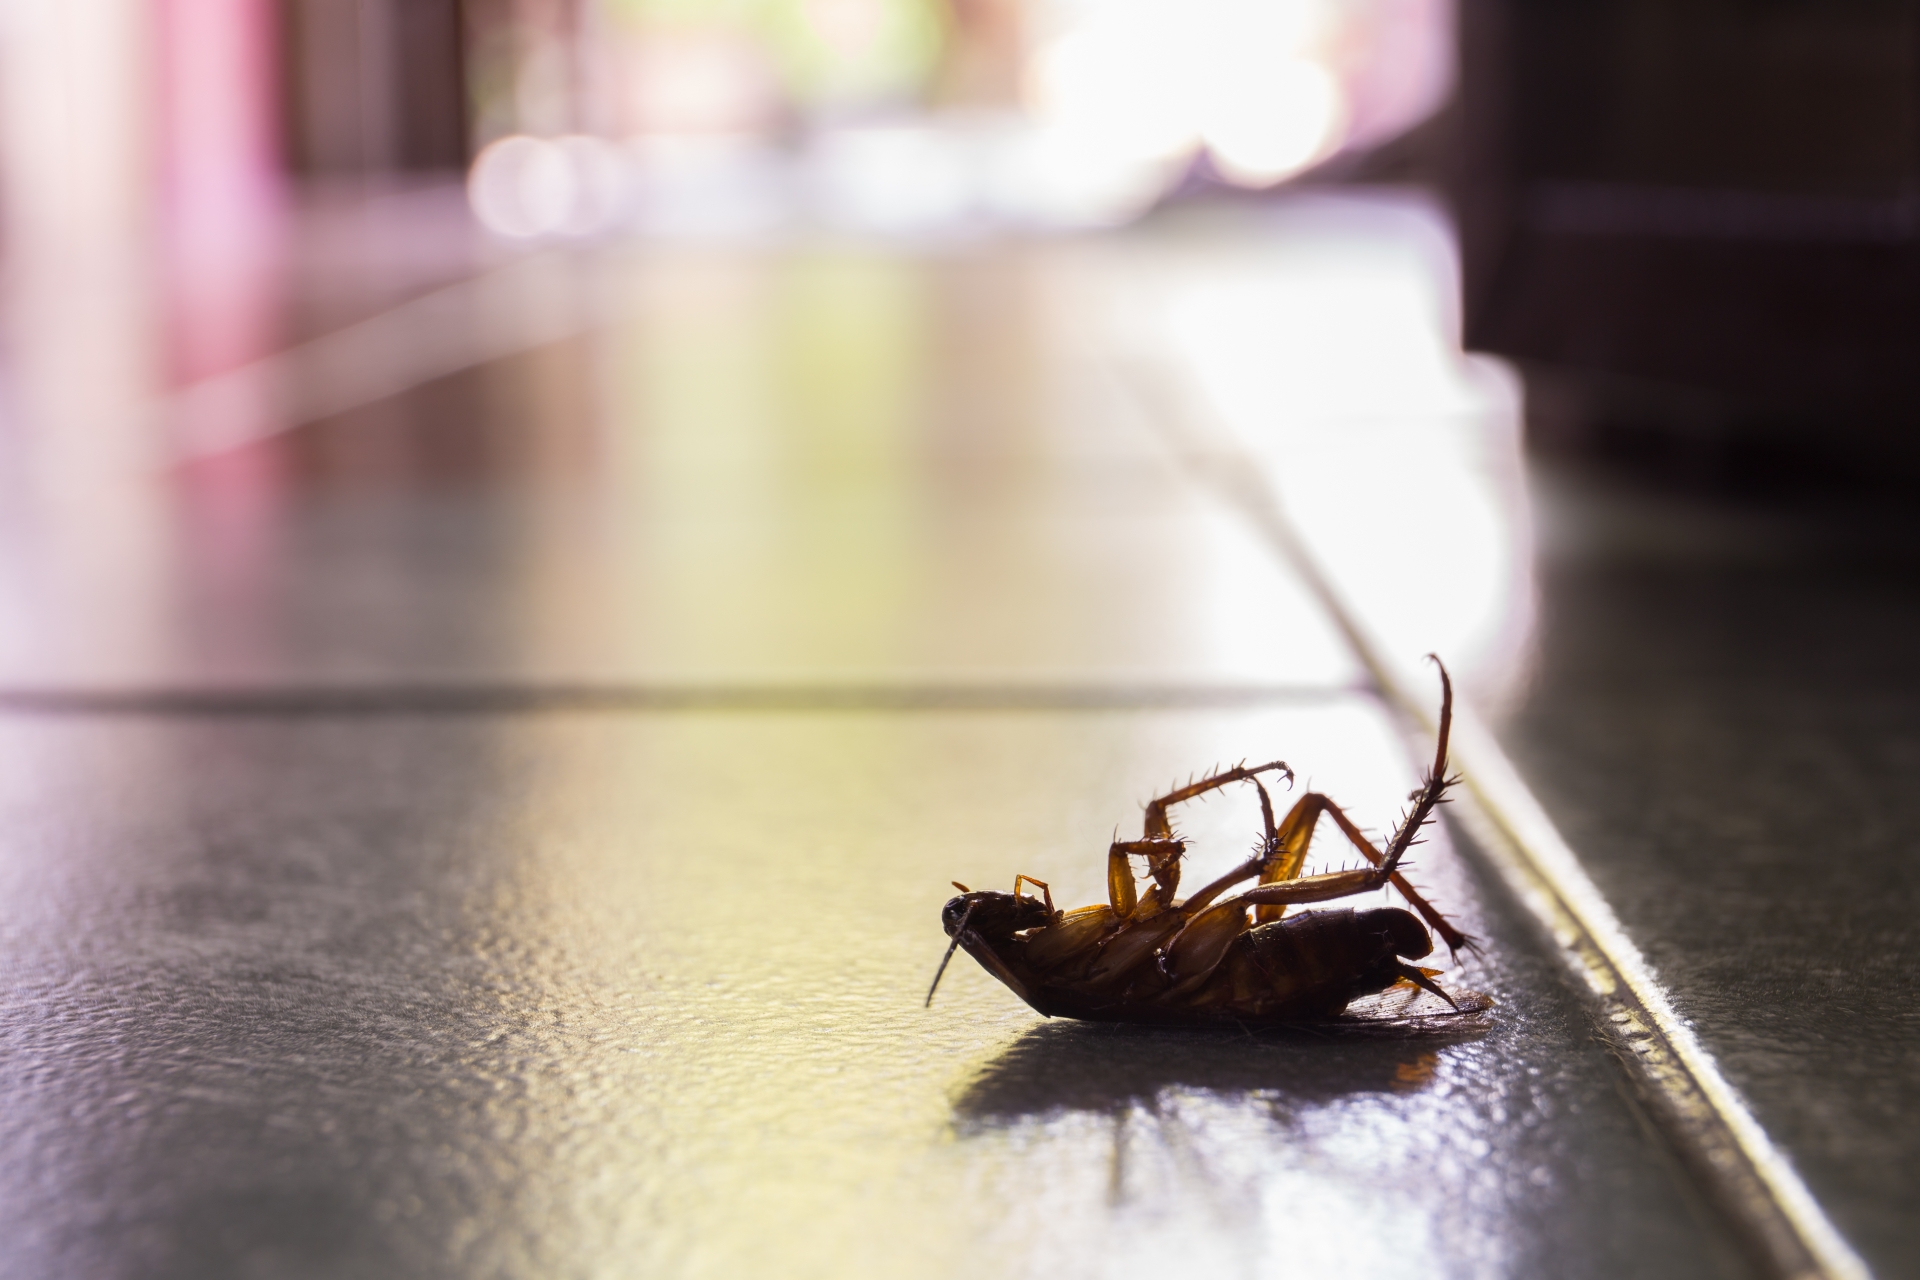 Cockroach Control, Pest Control in West Ealing, W13. Call Now 020 8166 9746